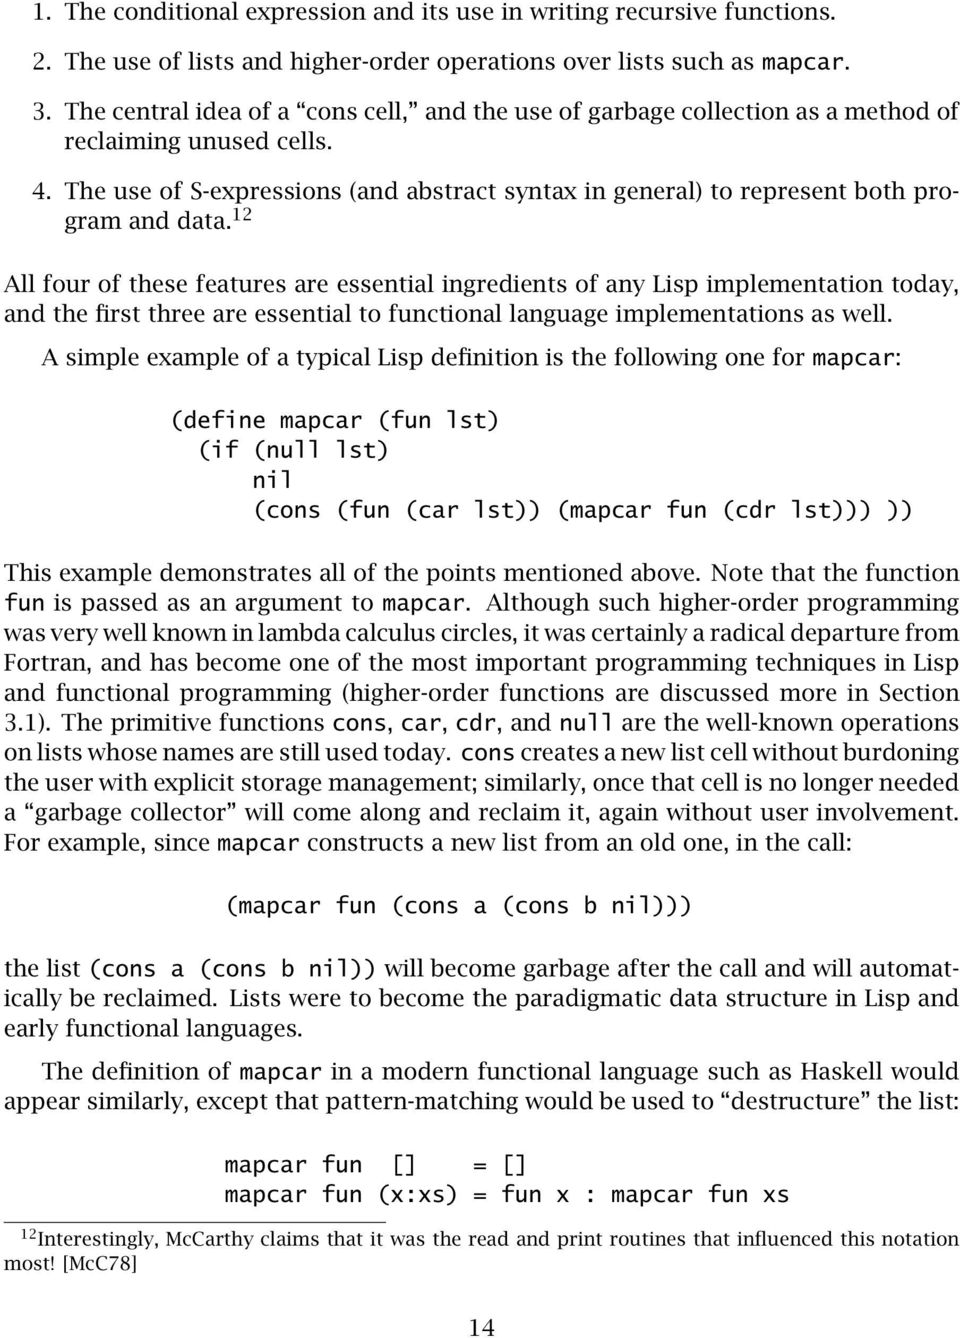 The use of S-expressions (and abstract syntax in general) to represent both program and data.